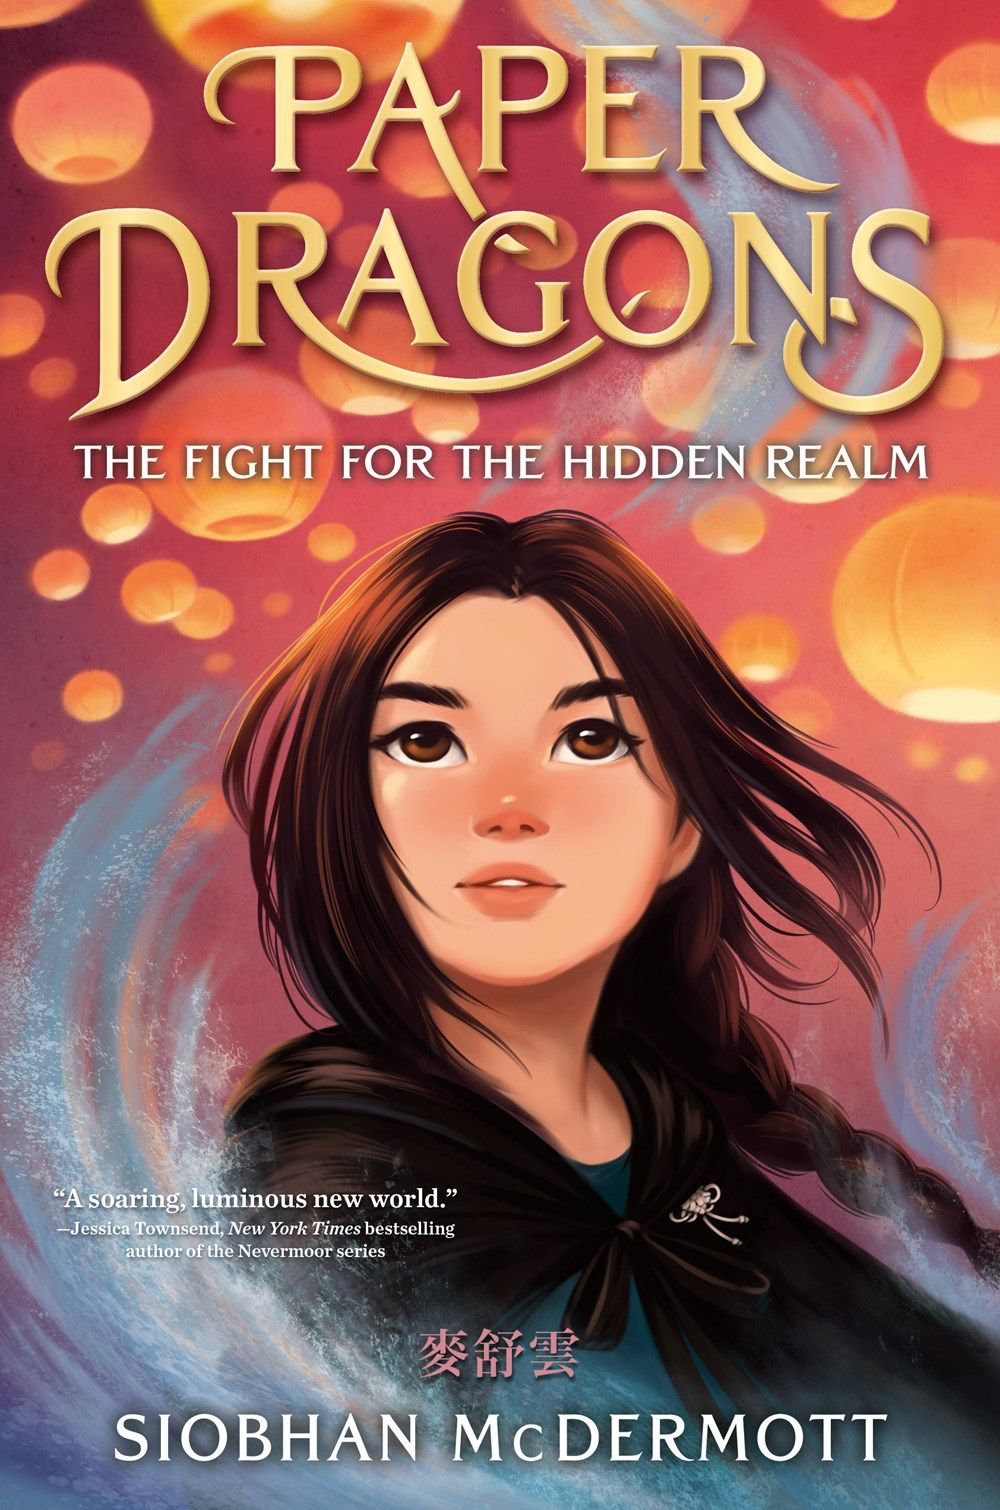 Cover of Paper Dragons: The Fight for the Hidden Realm by Siobhan McDermott